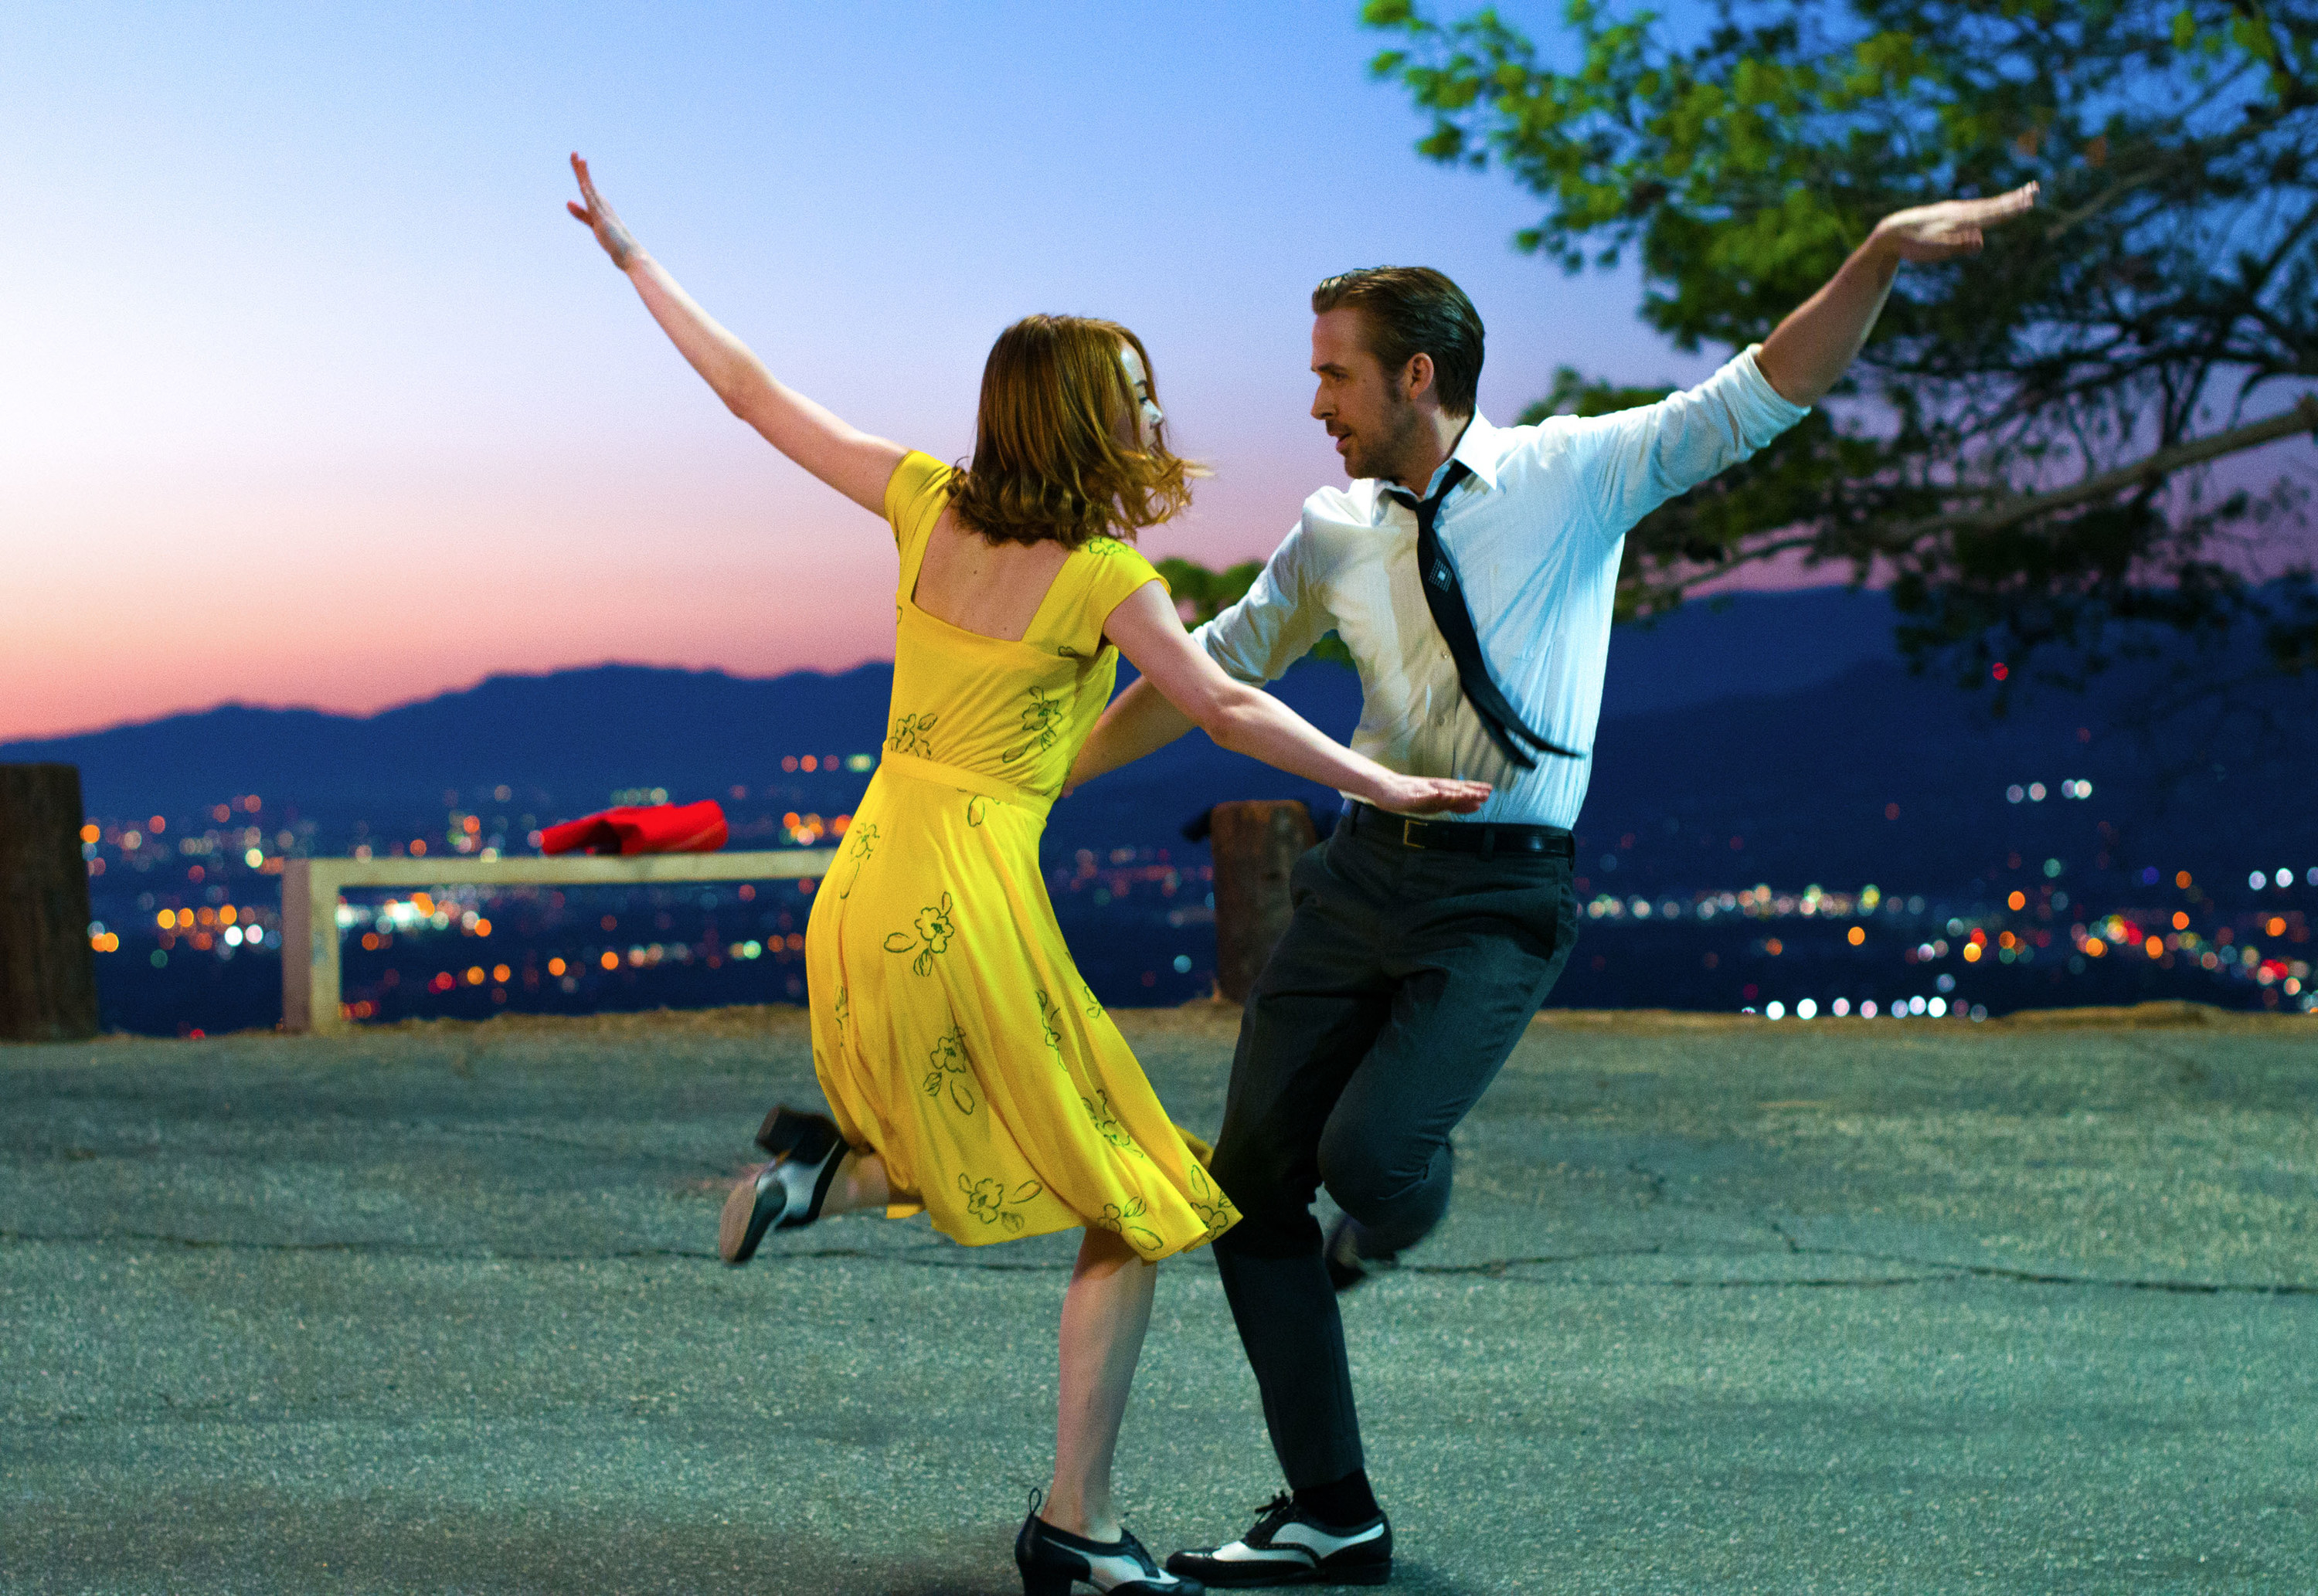 Mia, wearing a brightly colored dress, and Sebastian, wears dark slacks with a button up shirt, dance against a setting sun